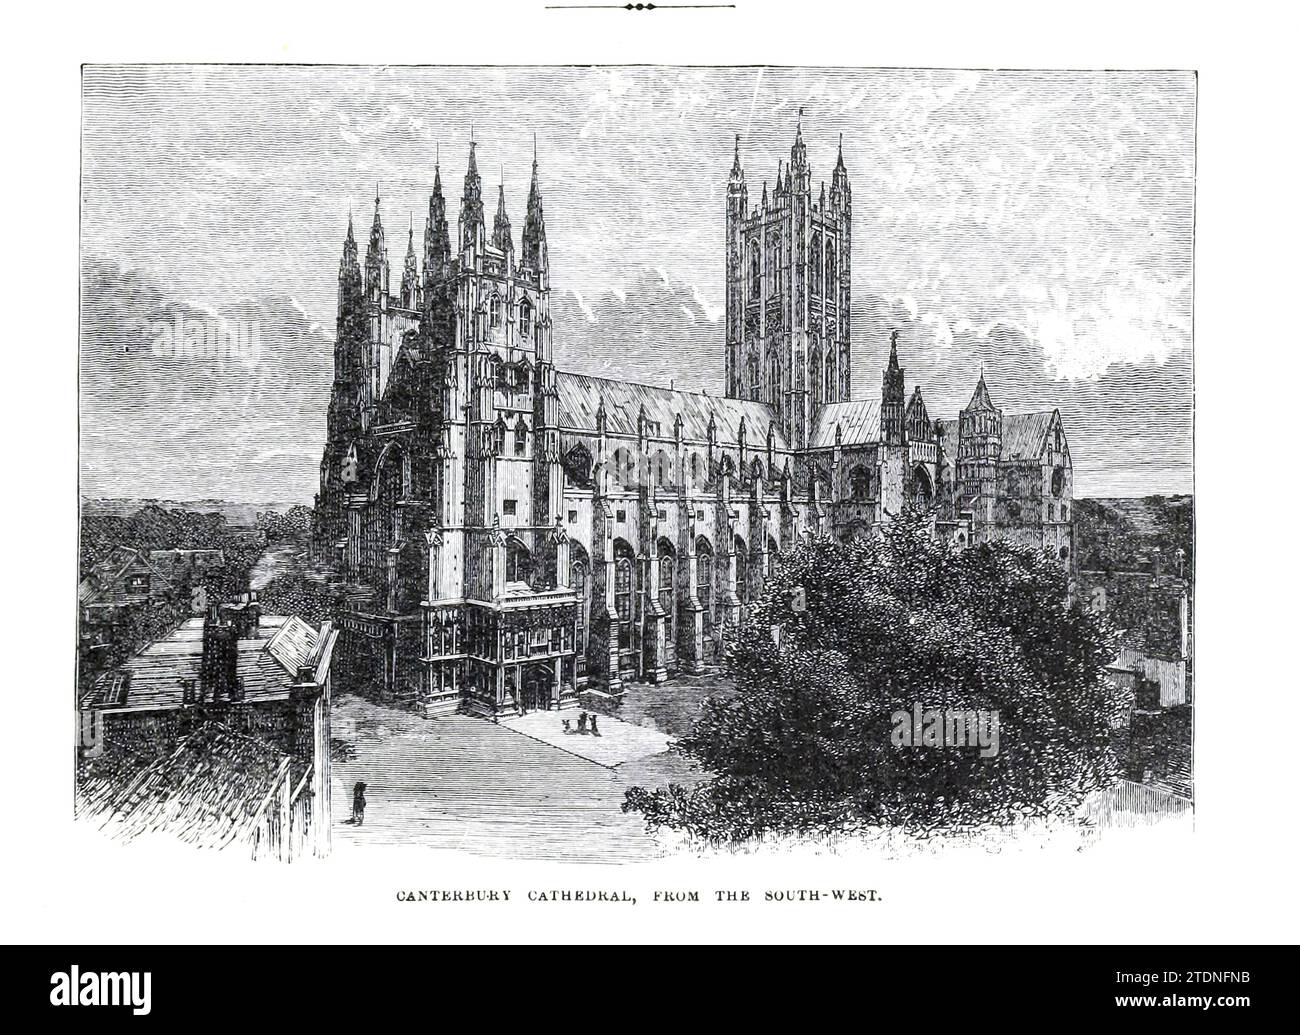 Canterbury Cathedral from the South West aus dem Buch Cathedrals, Abbeys and Church of England and Wales : Descriptive, Historical, Pictorial Band 1 von Bonney, T. G. (Thomas George), 1833–1923; Publisher London : Cassell 1890 Stockfoto